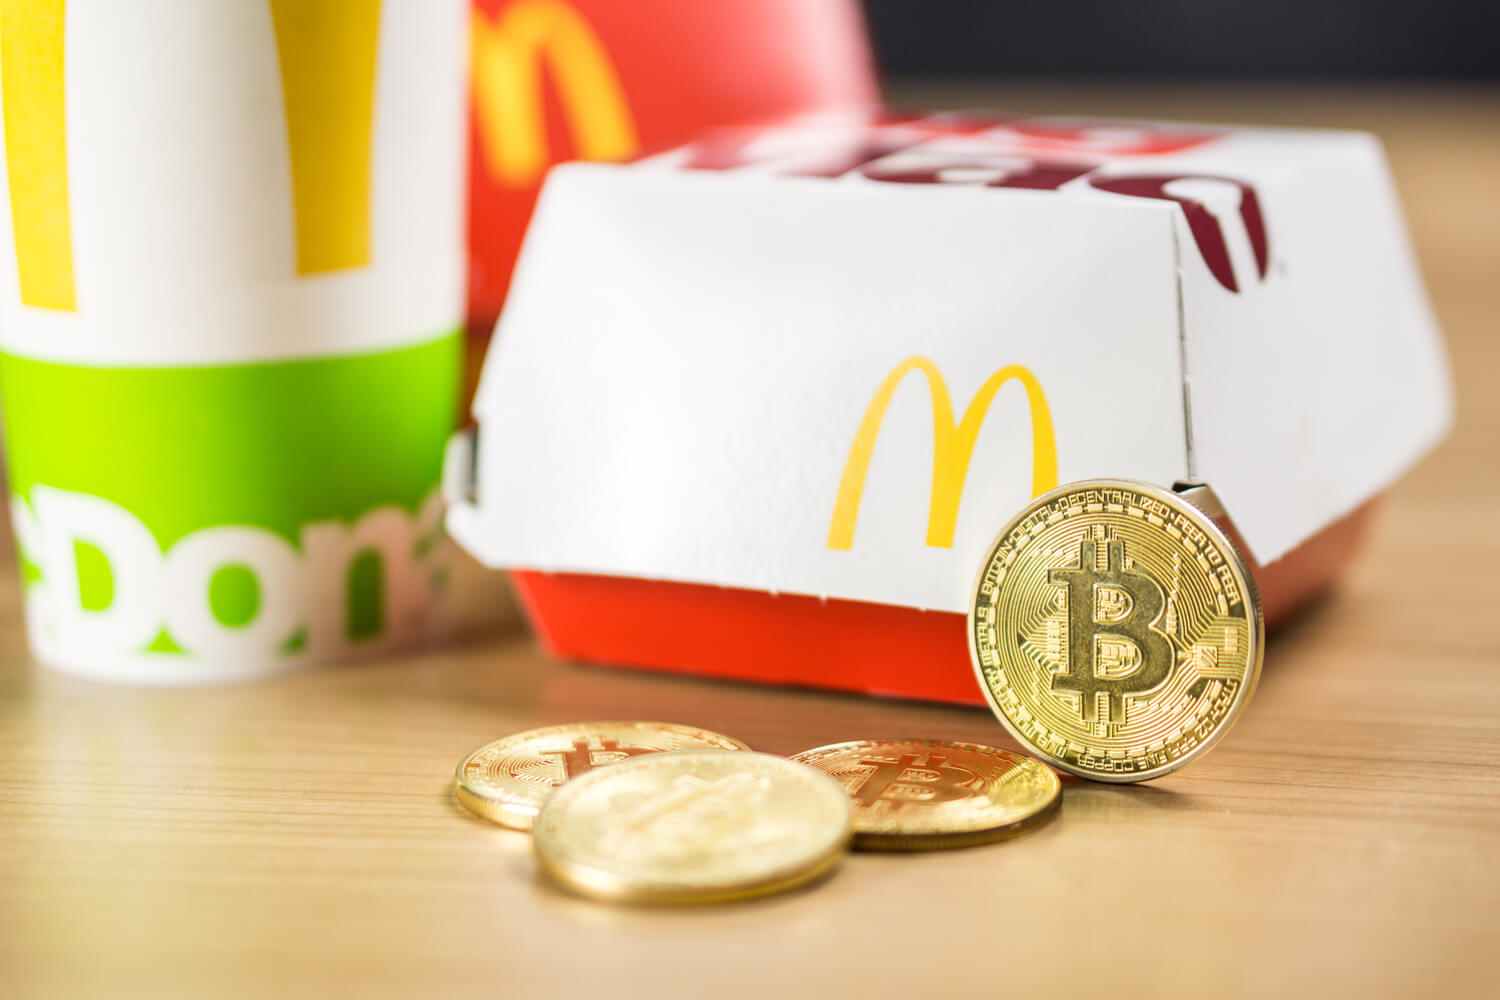 Golden Bitcoin coin propped up against a McDonalds meal